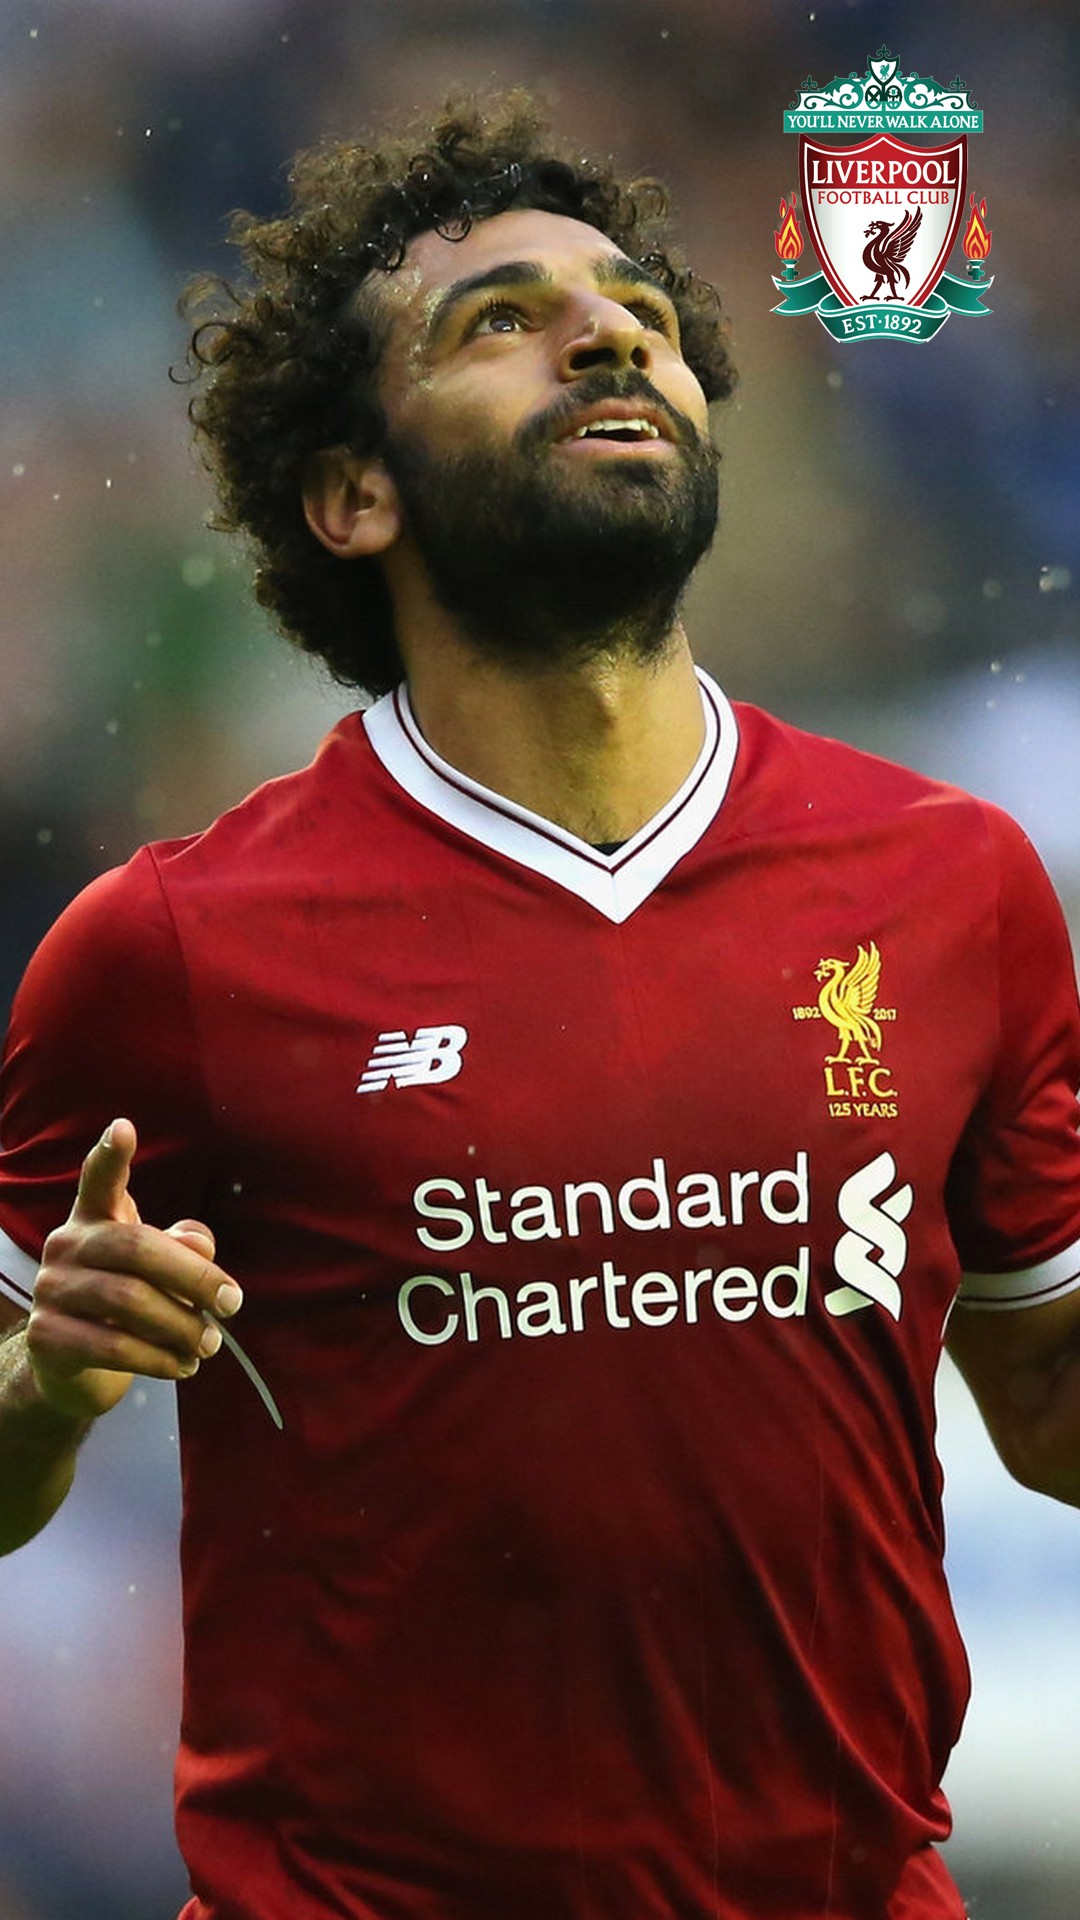 Android Wallpaper HD Mohamed Salah with image resolution 1080x1920 pixel. You can make this wallpaper for your Android backgrounds, Tablet, Smartphones Screensavers and Mobile Phone Lock Screen